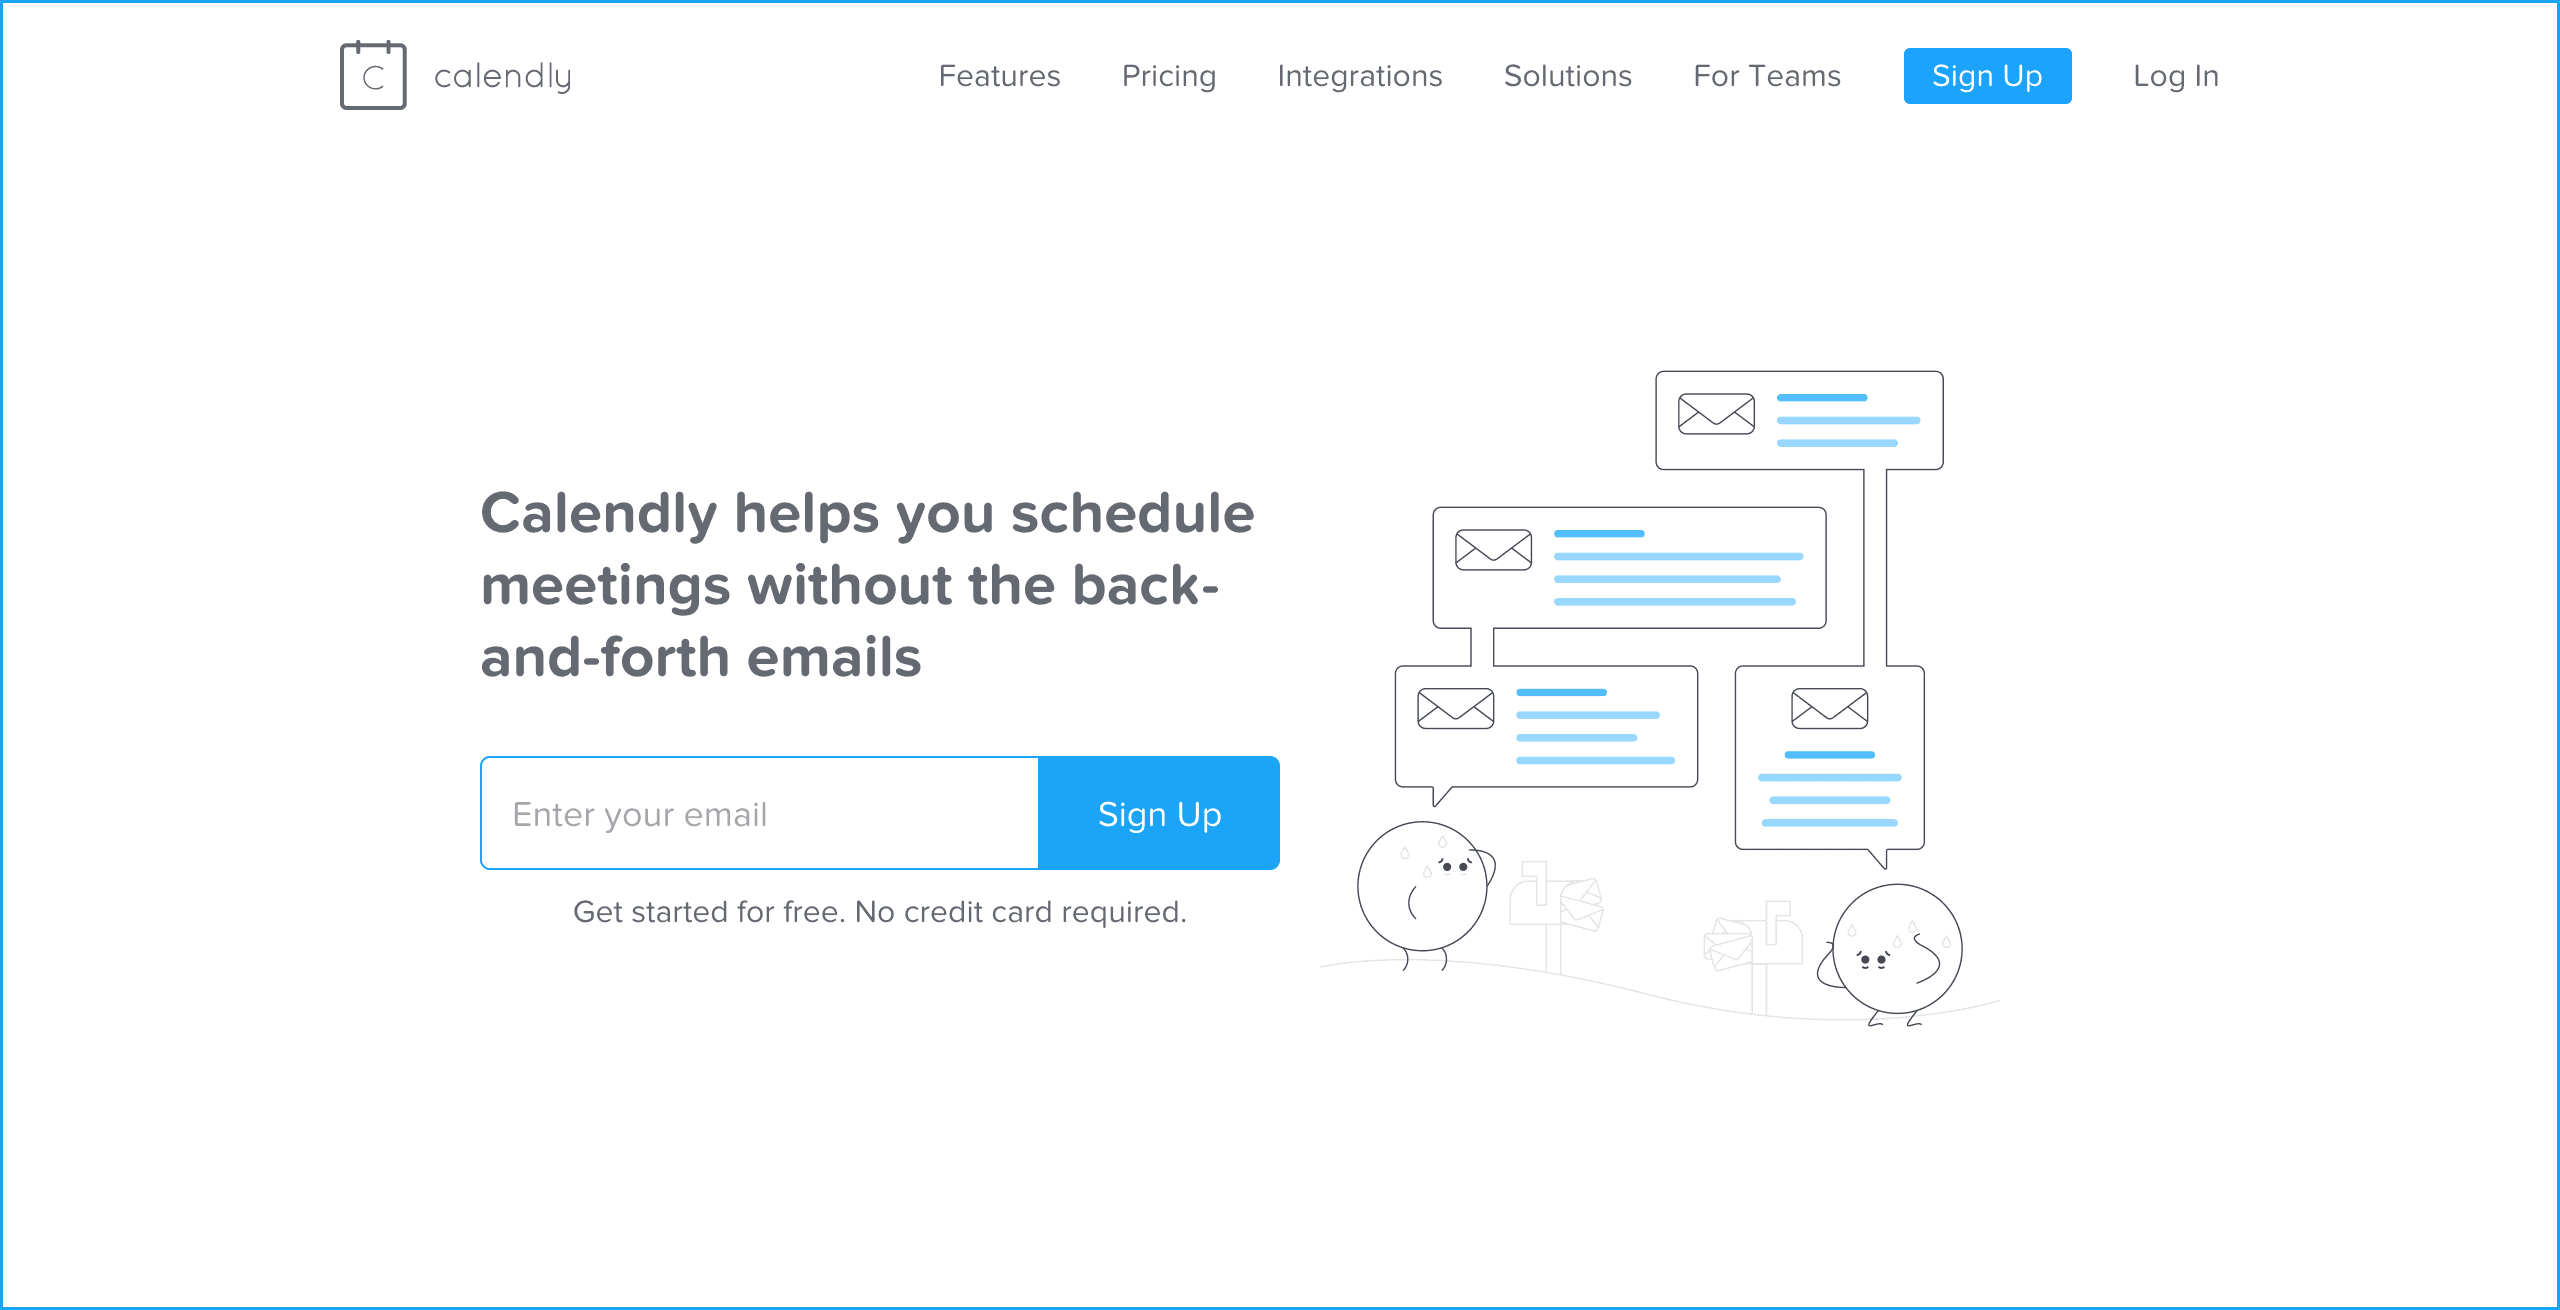 Header section of Calendly's website.